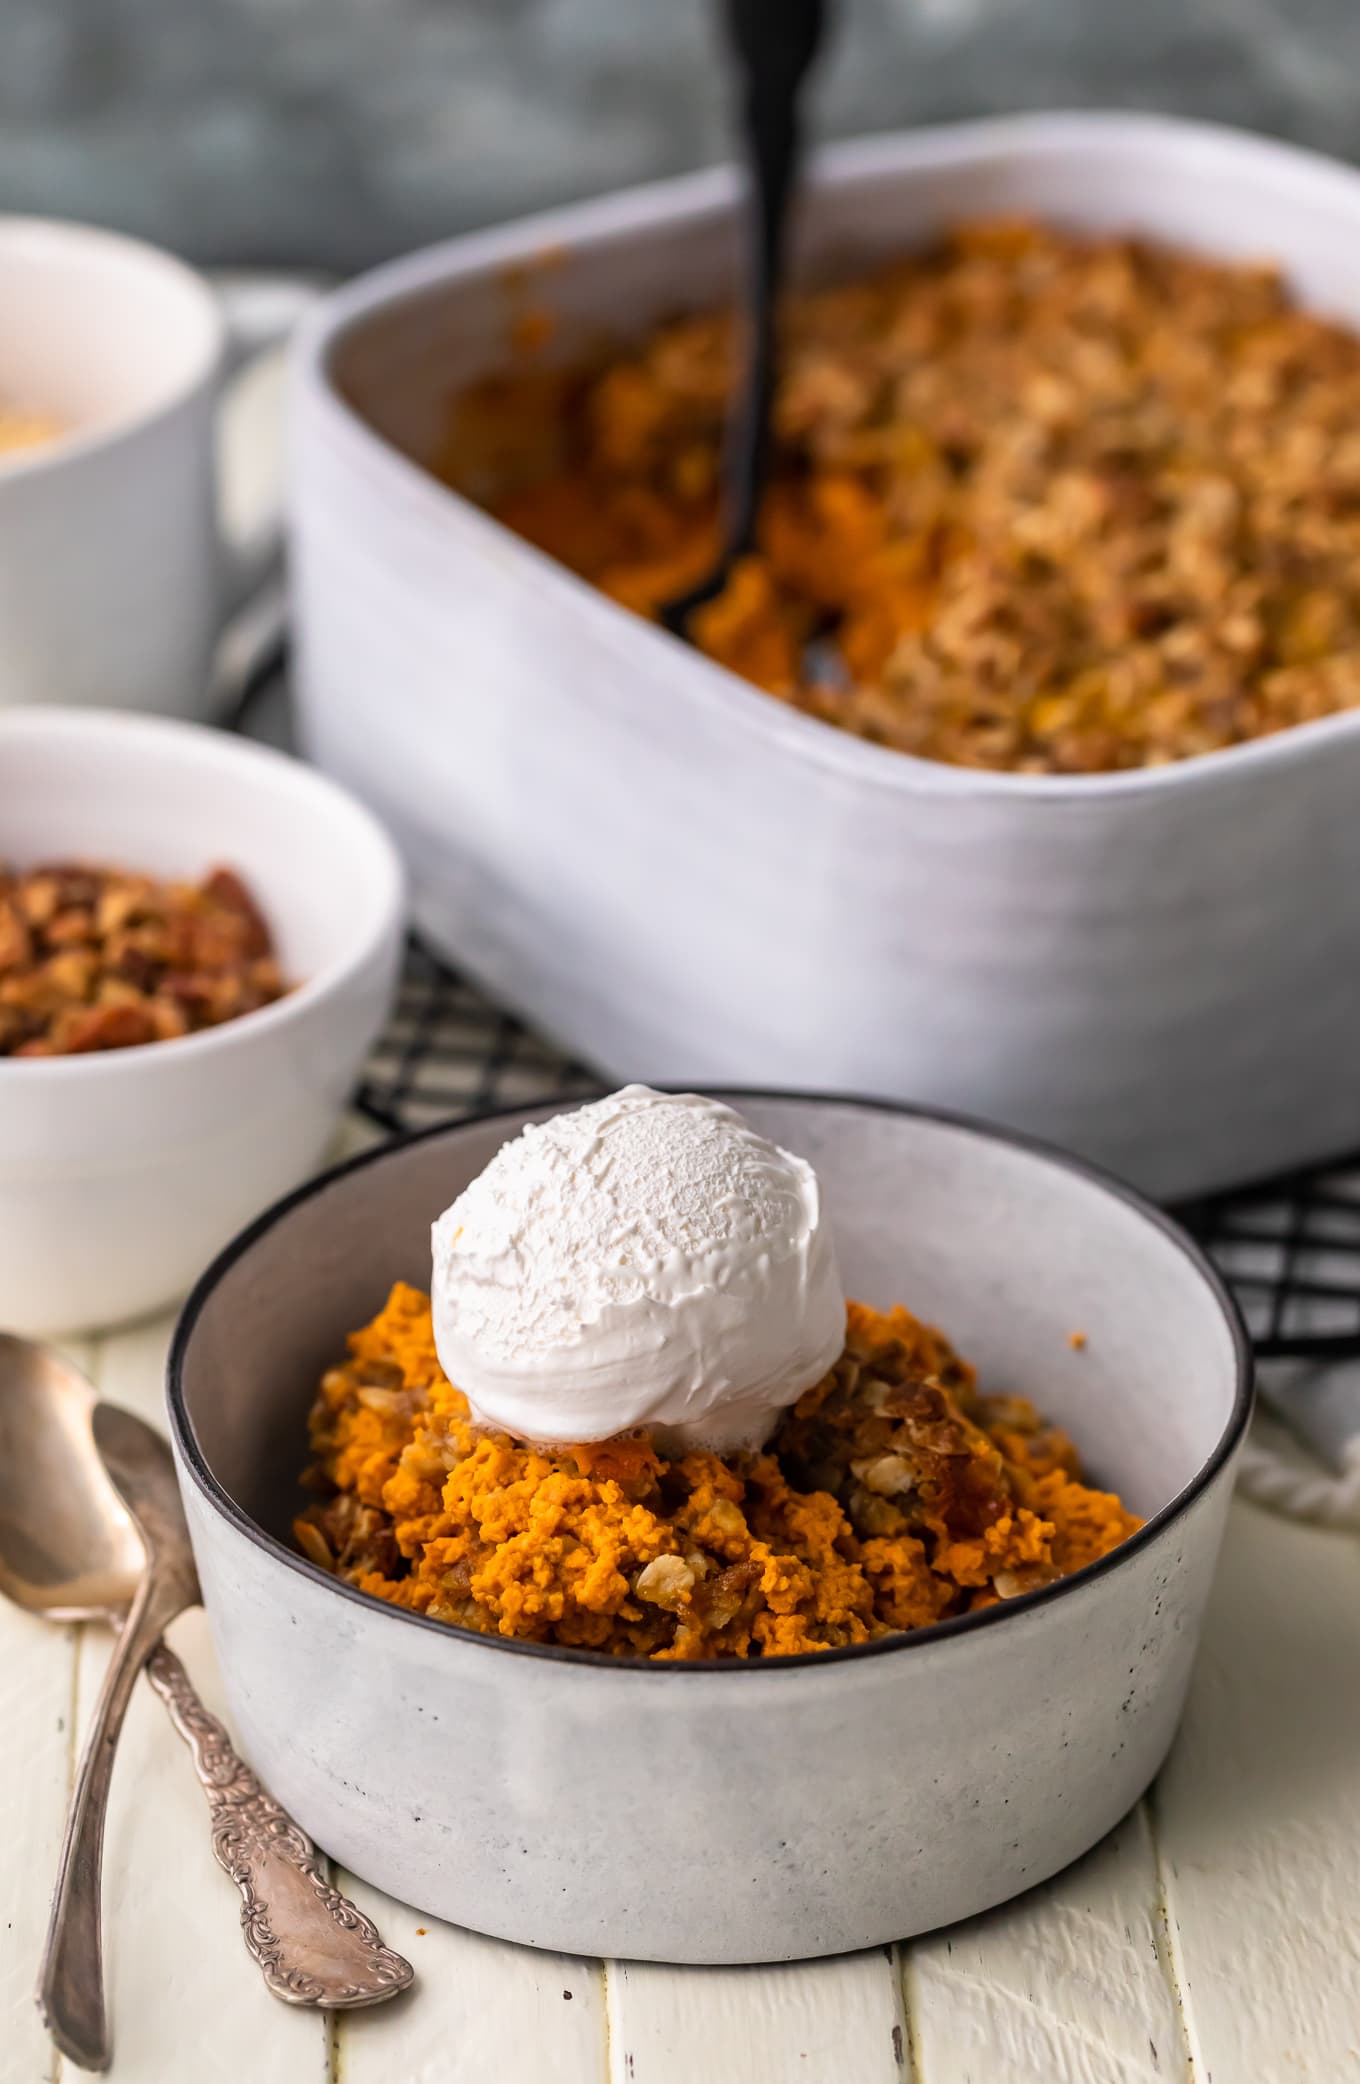 white bowl filled with pumpkin crumble recipe in the foreground, a baking dish filled with crumble dessert in the background